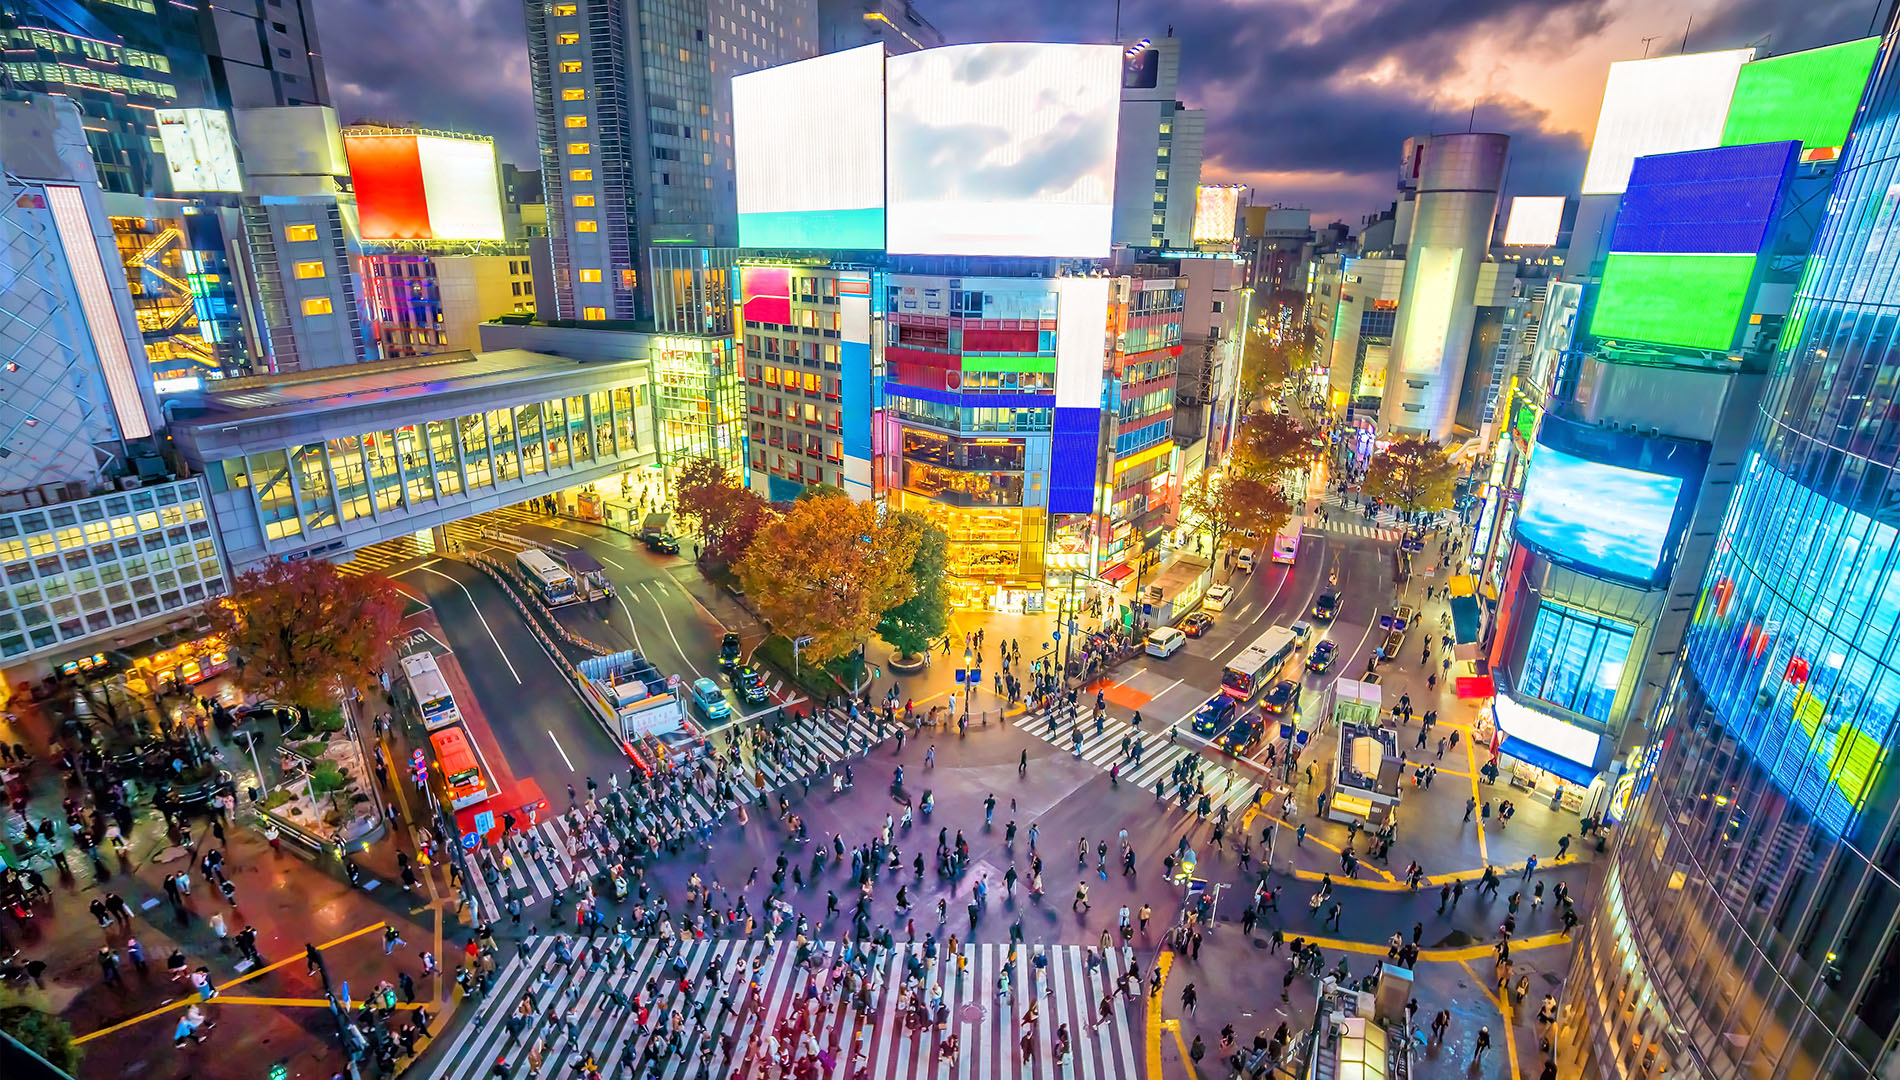 Tokyo guide: Where to eat, drink, shop and stay in Japan's capital city, The Independent